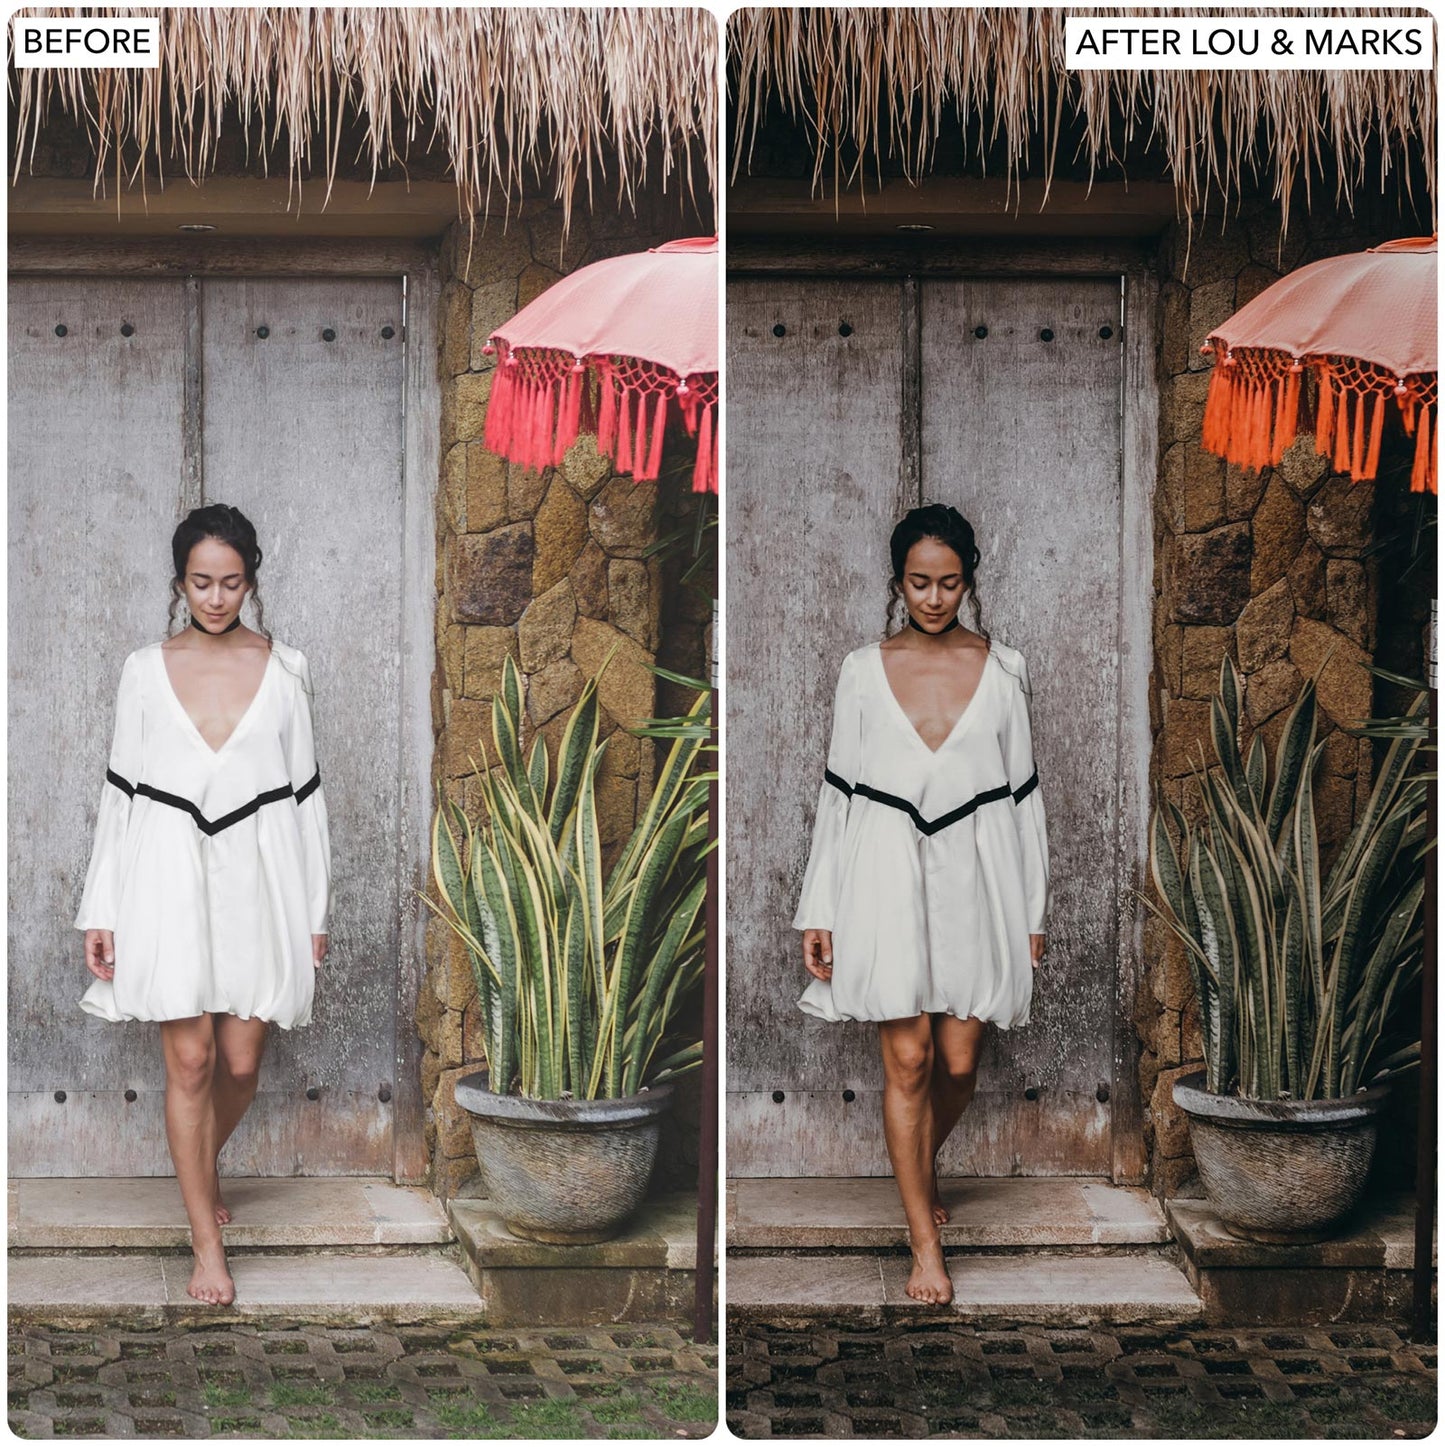 Load image into Gallery viewer, Bali Babe Presets
